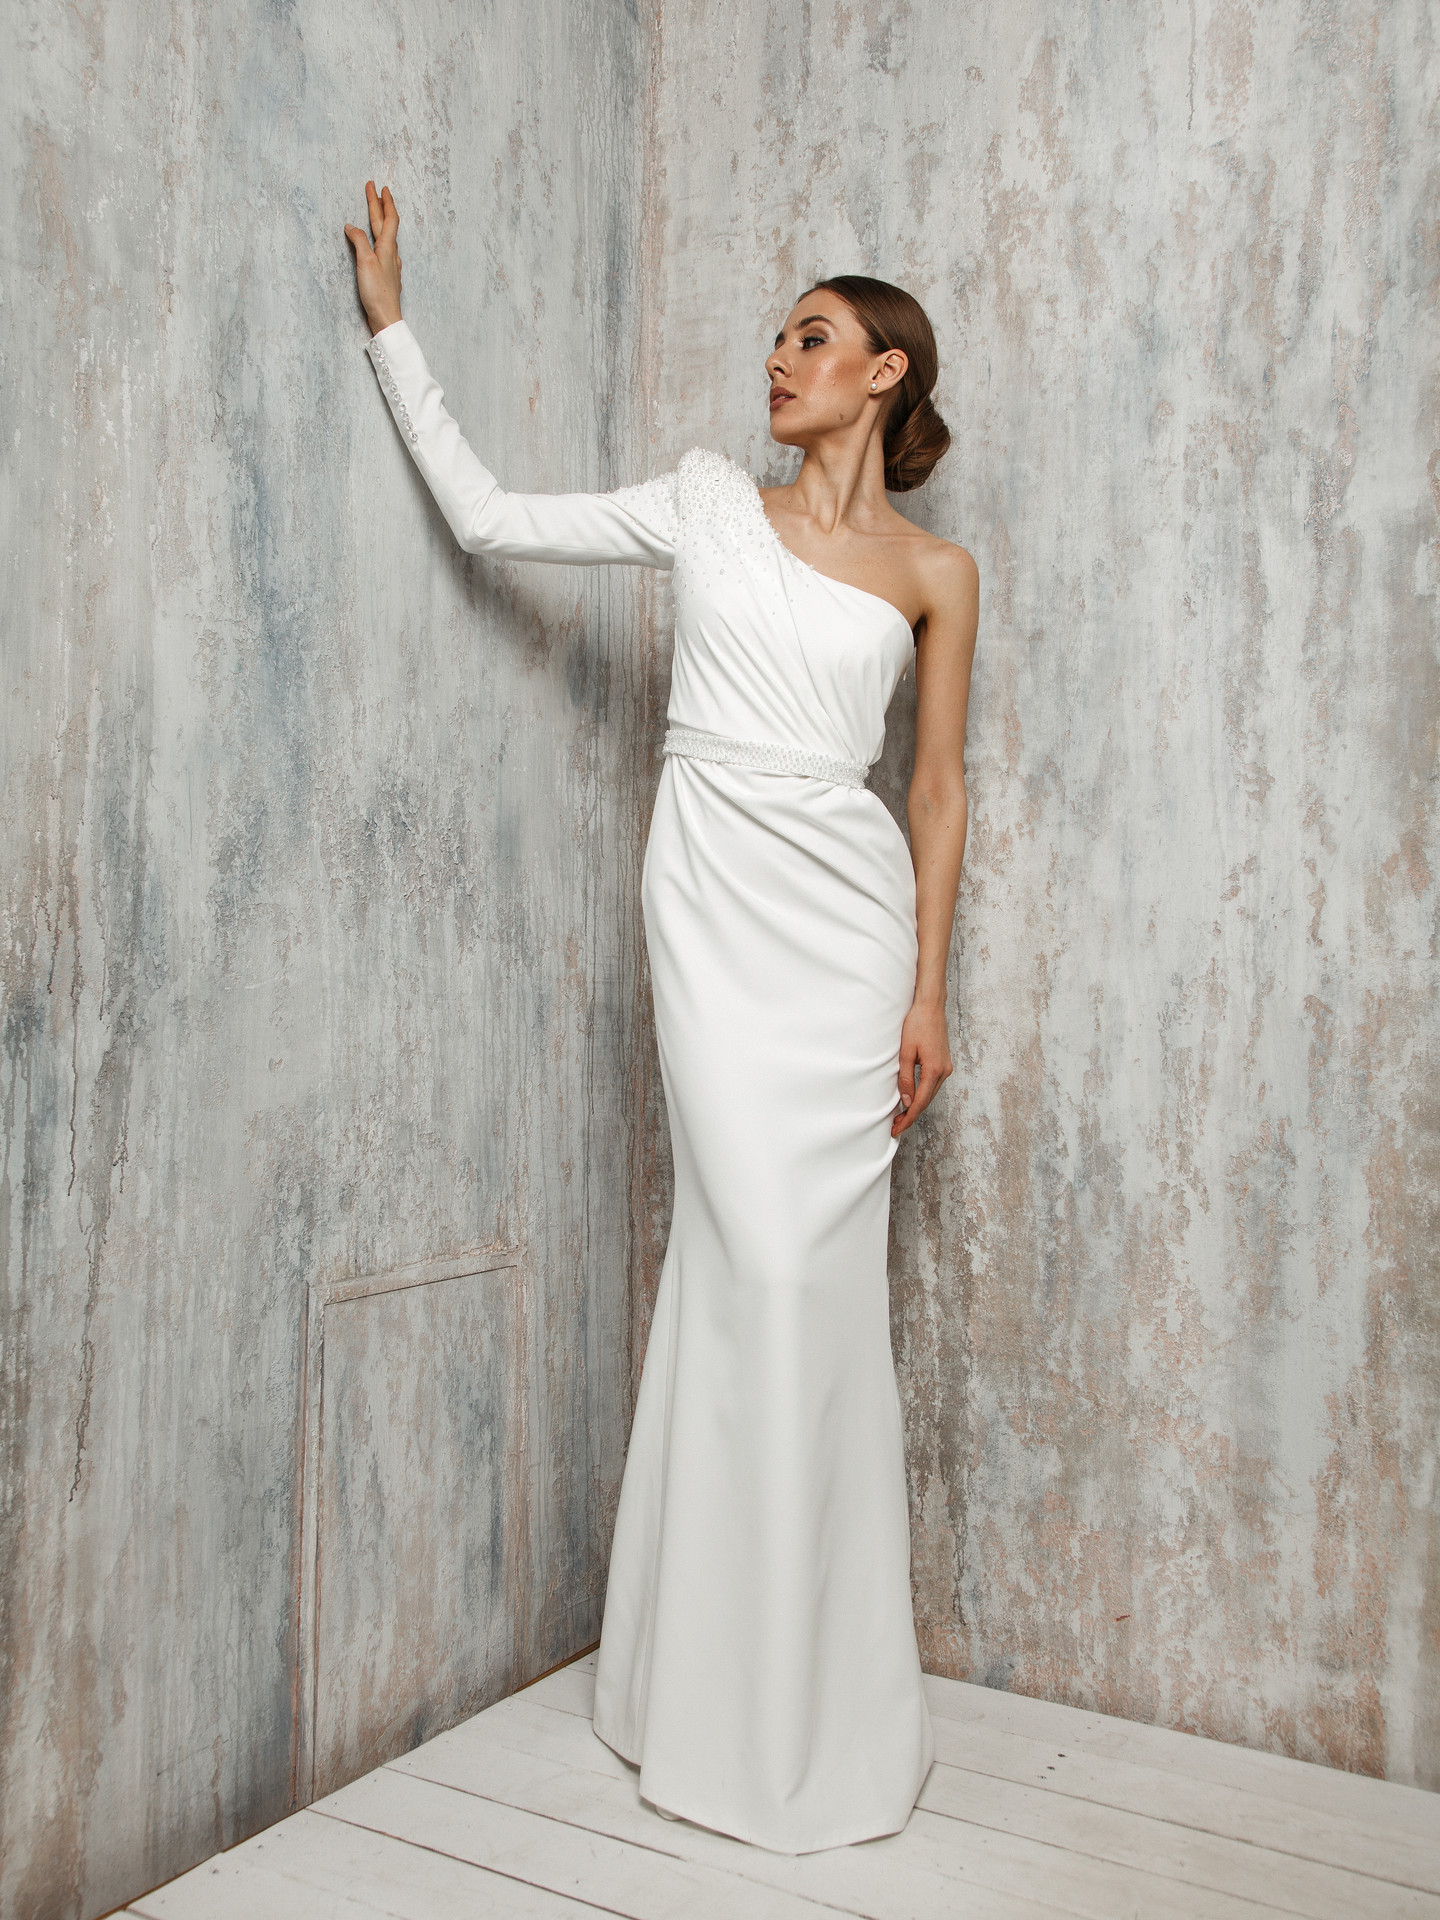 Paulette gown, 2021, couture, dress, bridal, off-white, Paulette, sheath silhouette, embroidery, sleeves